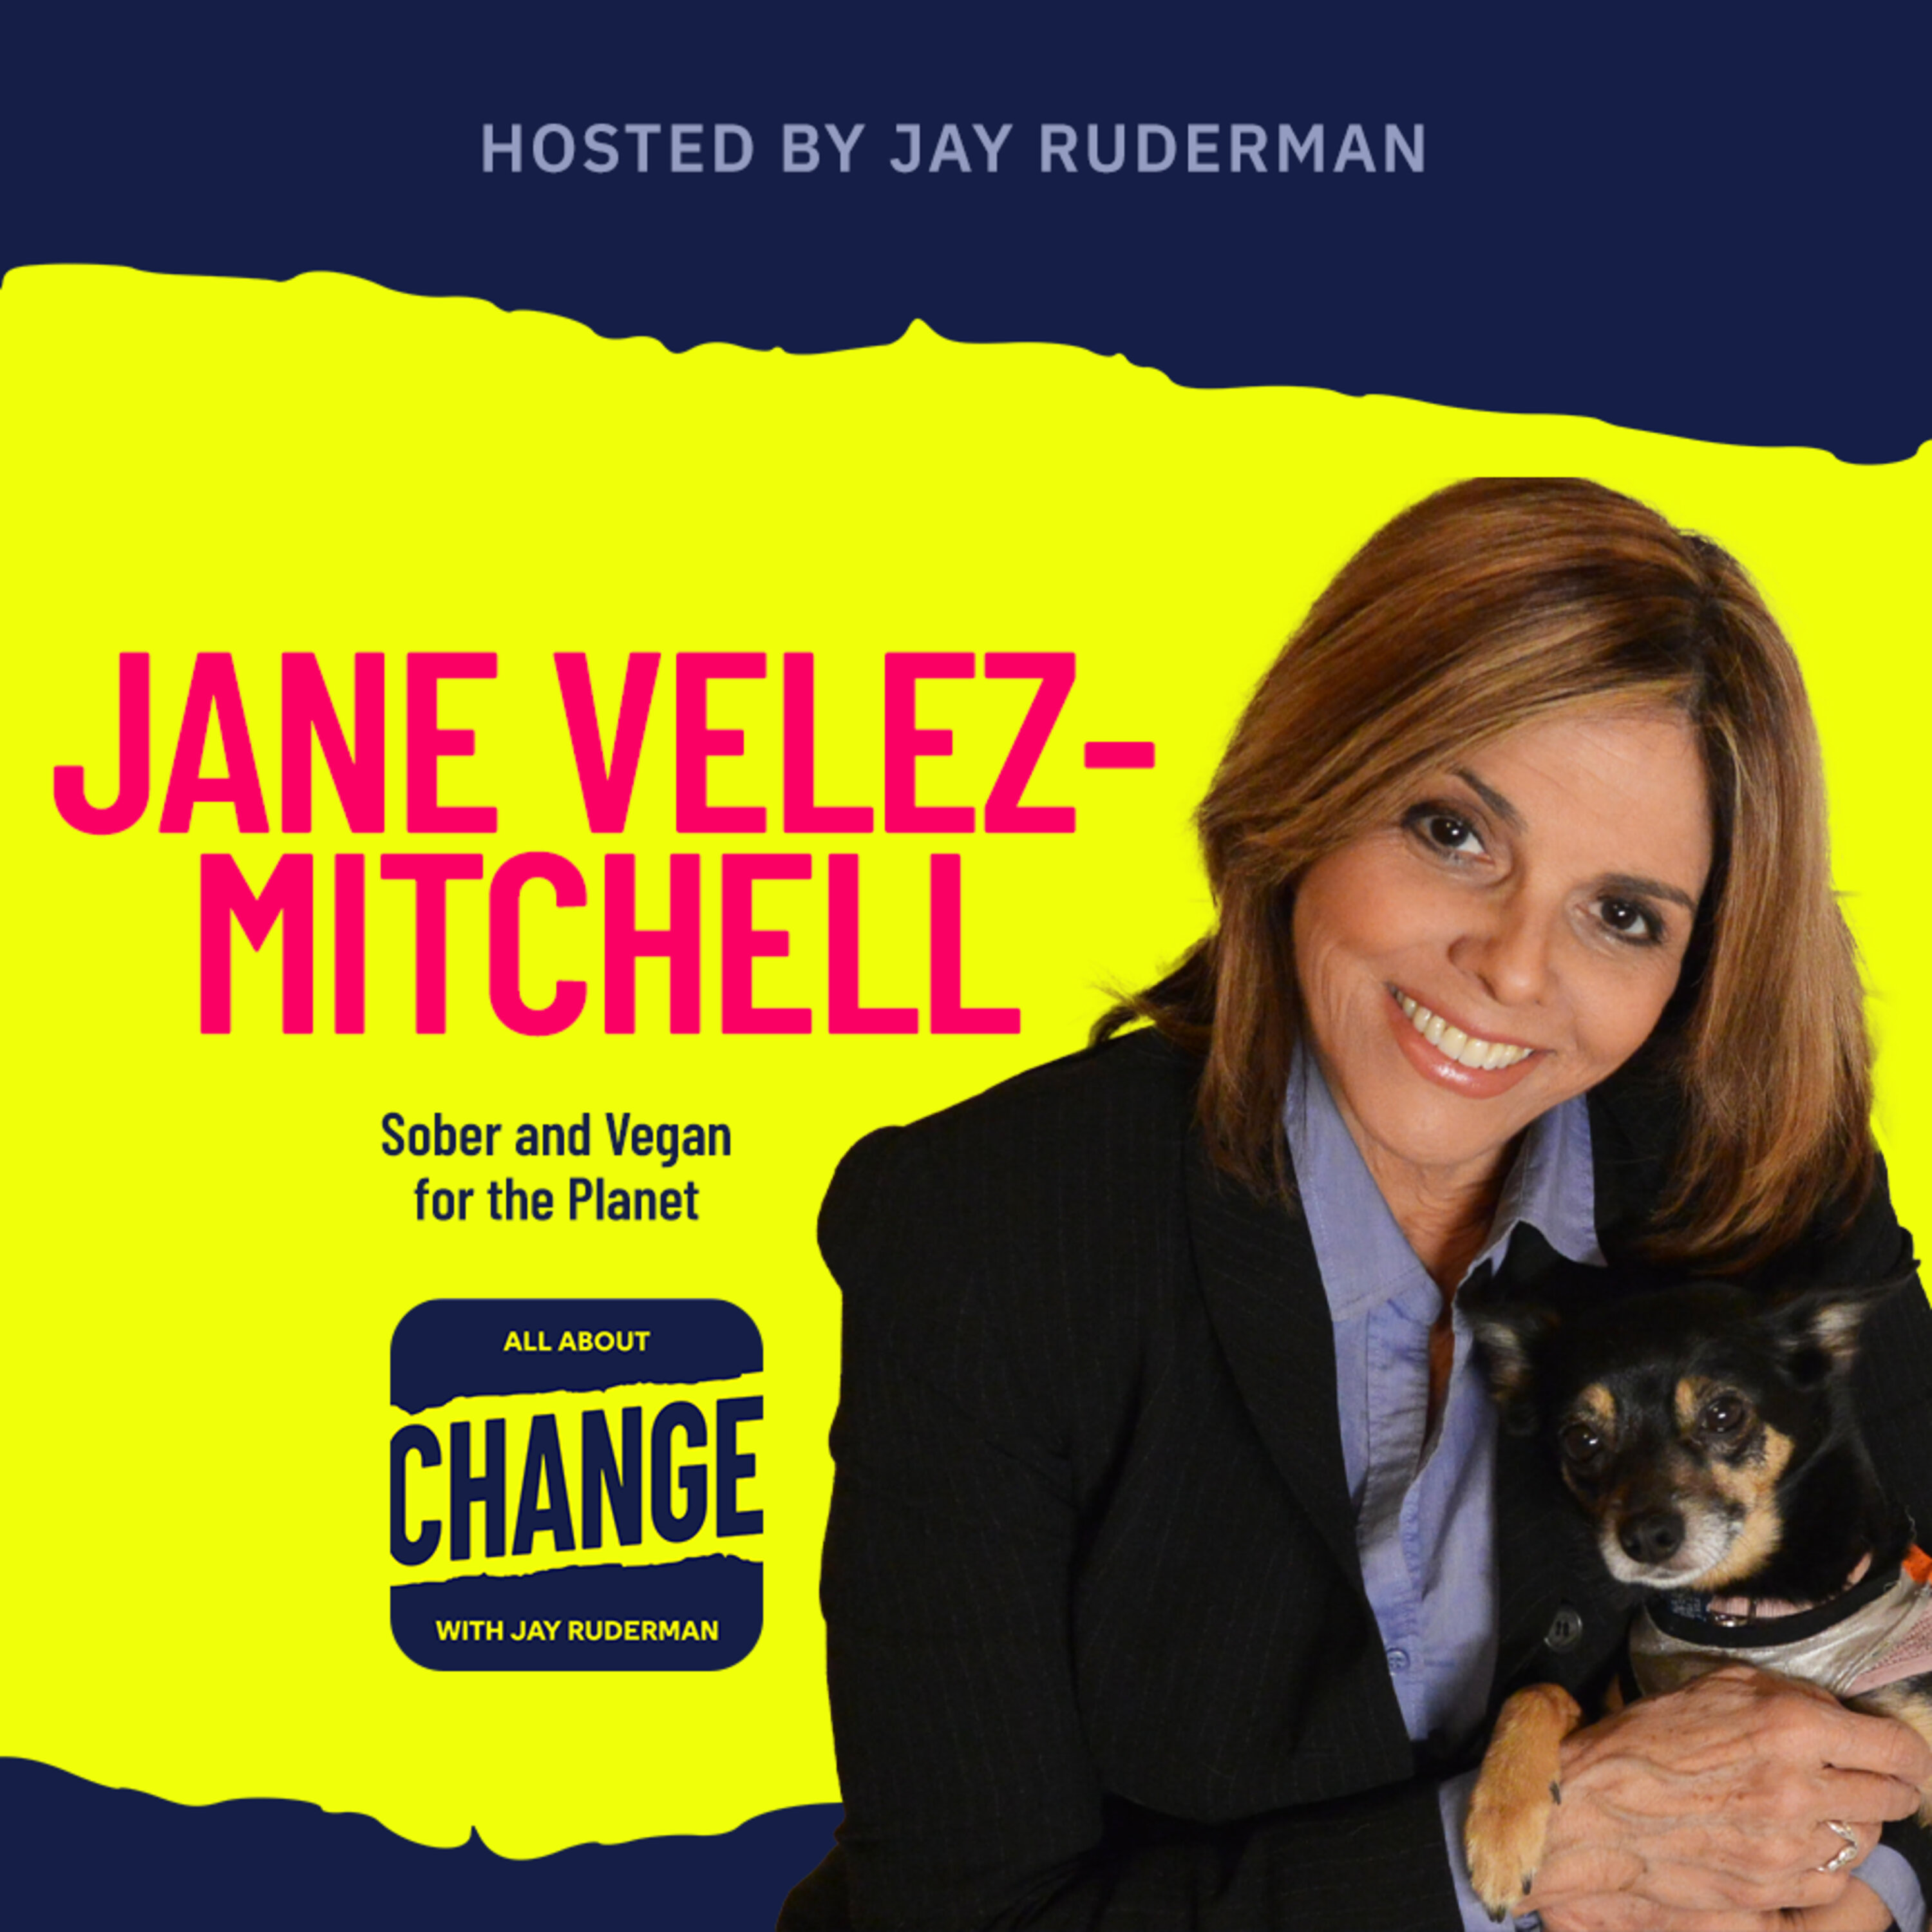 Jane Velez-Mitchell - Sober and Vegan for the Planet by Jay Ruderman